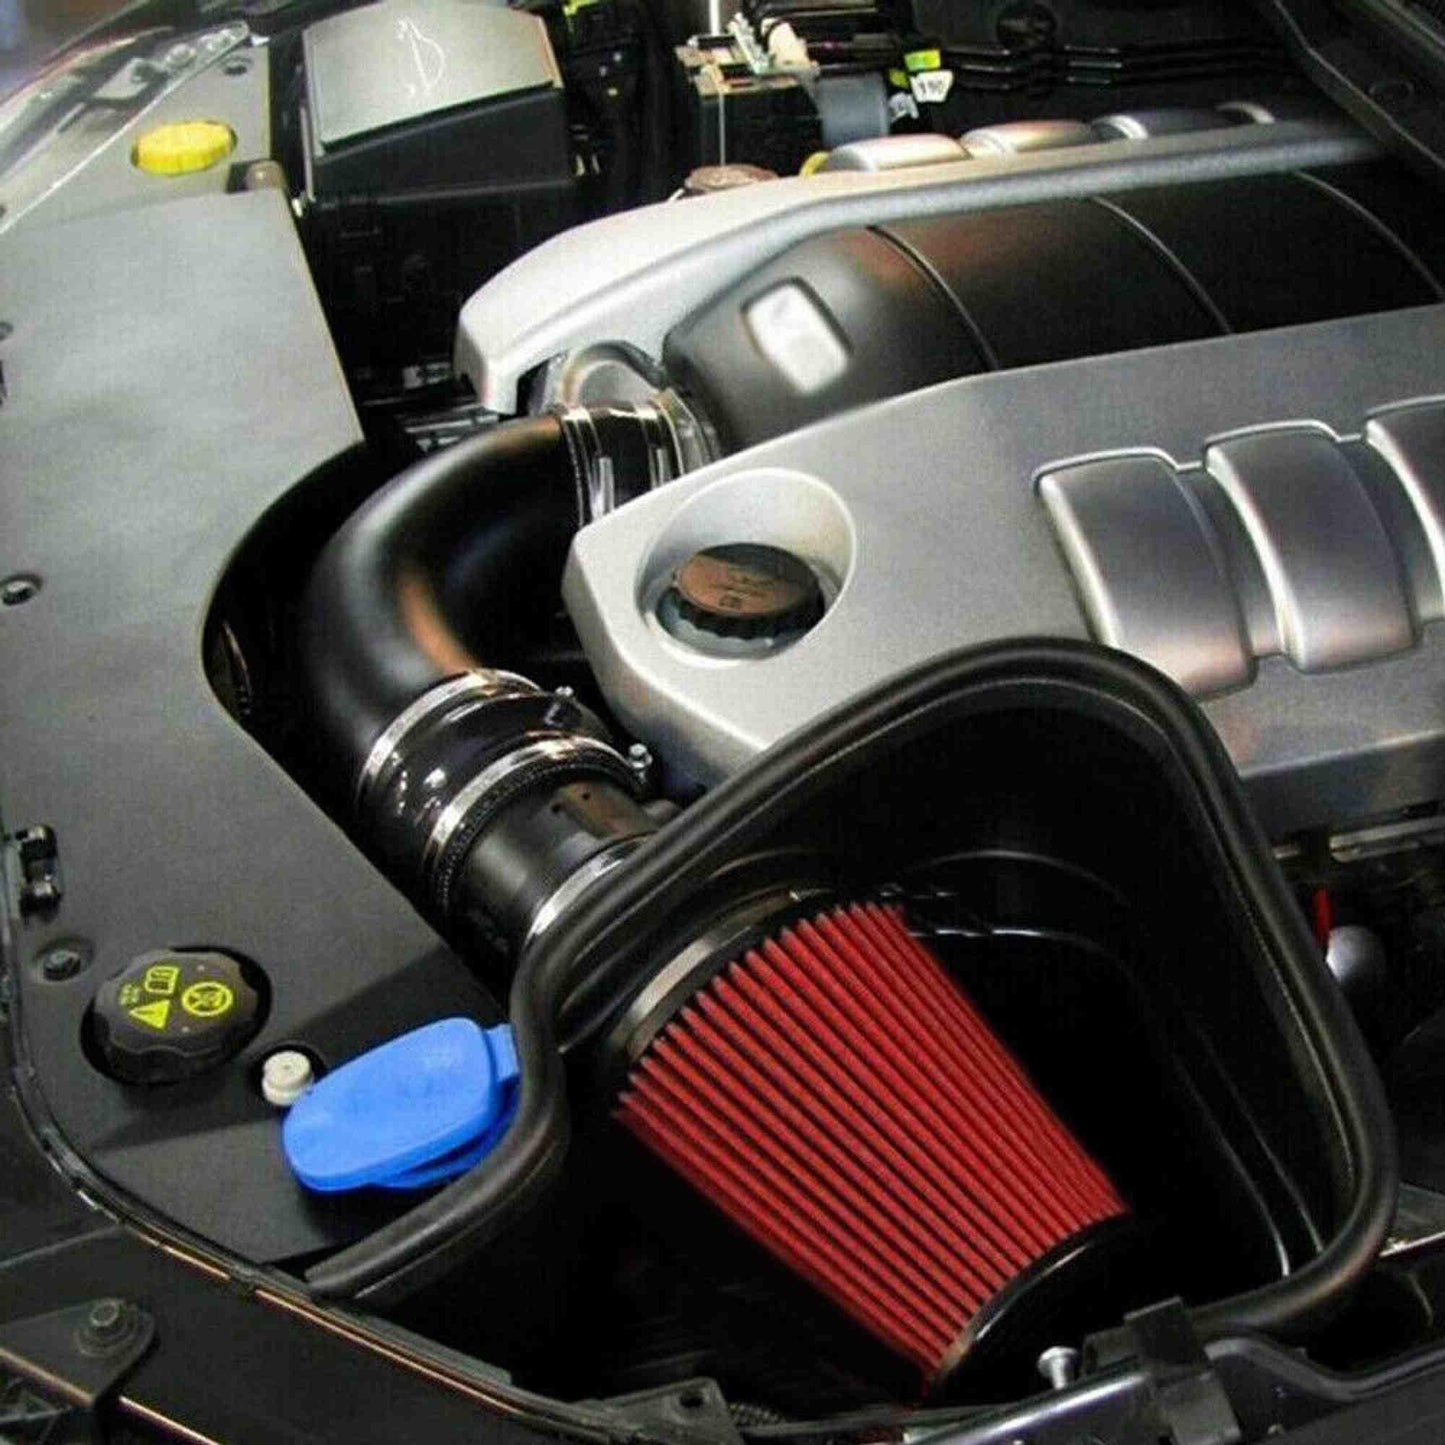 RASTP 3 Inch 76mm High Flow Inlet Dry Air Filter Cold Air Intake Cone Replacement - RASTP